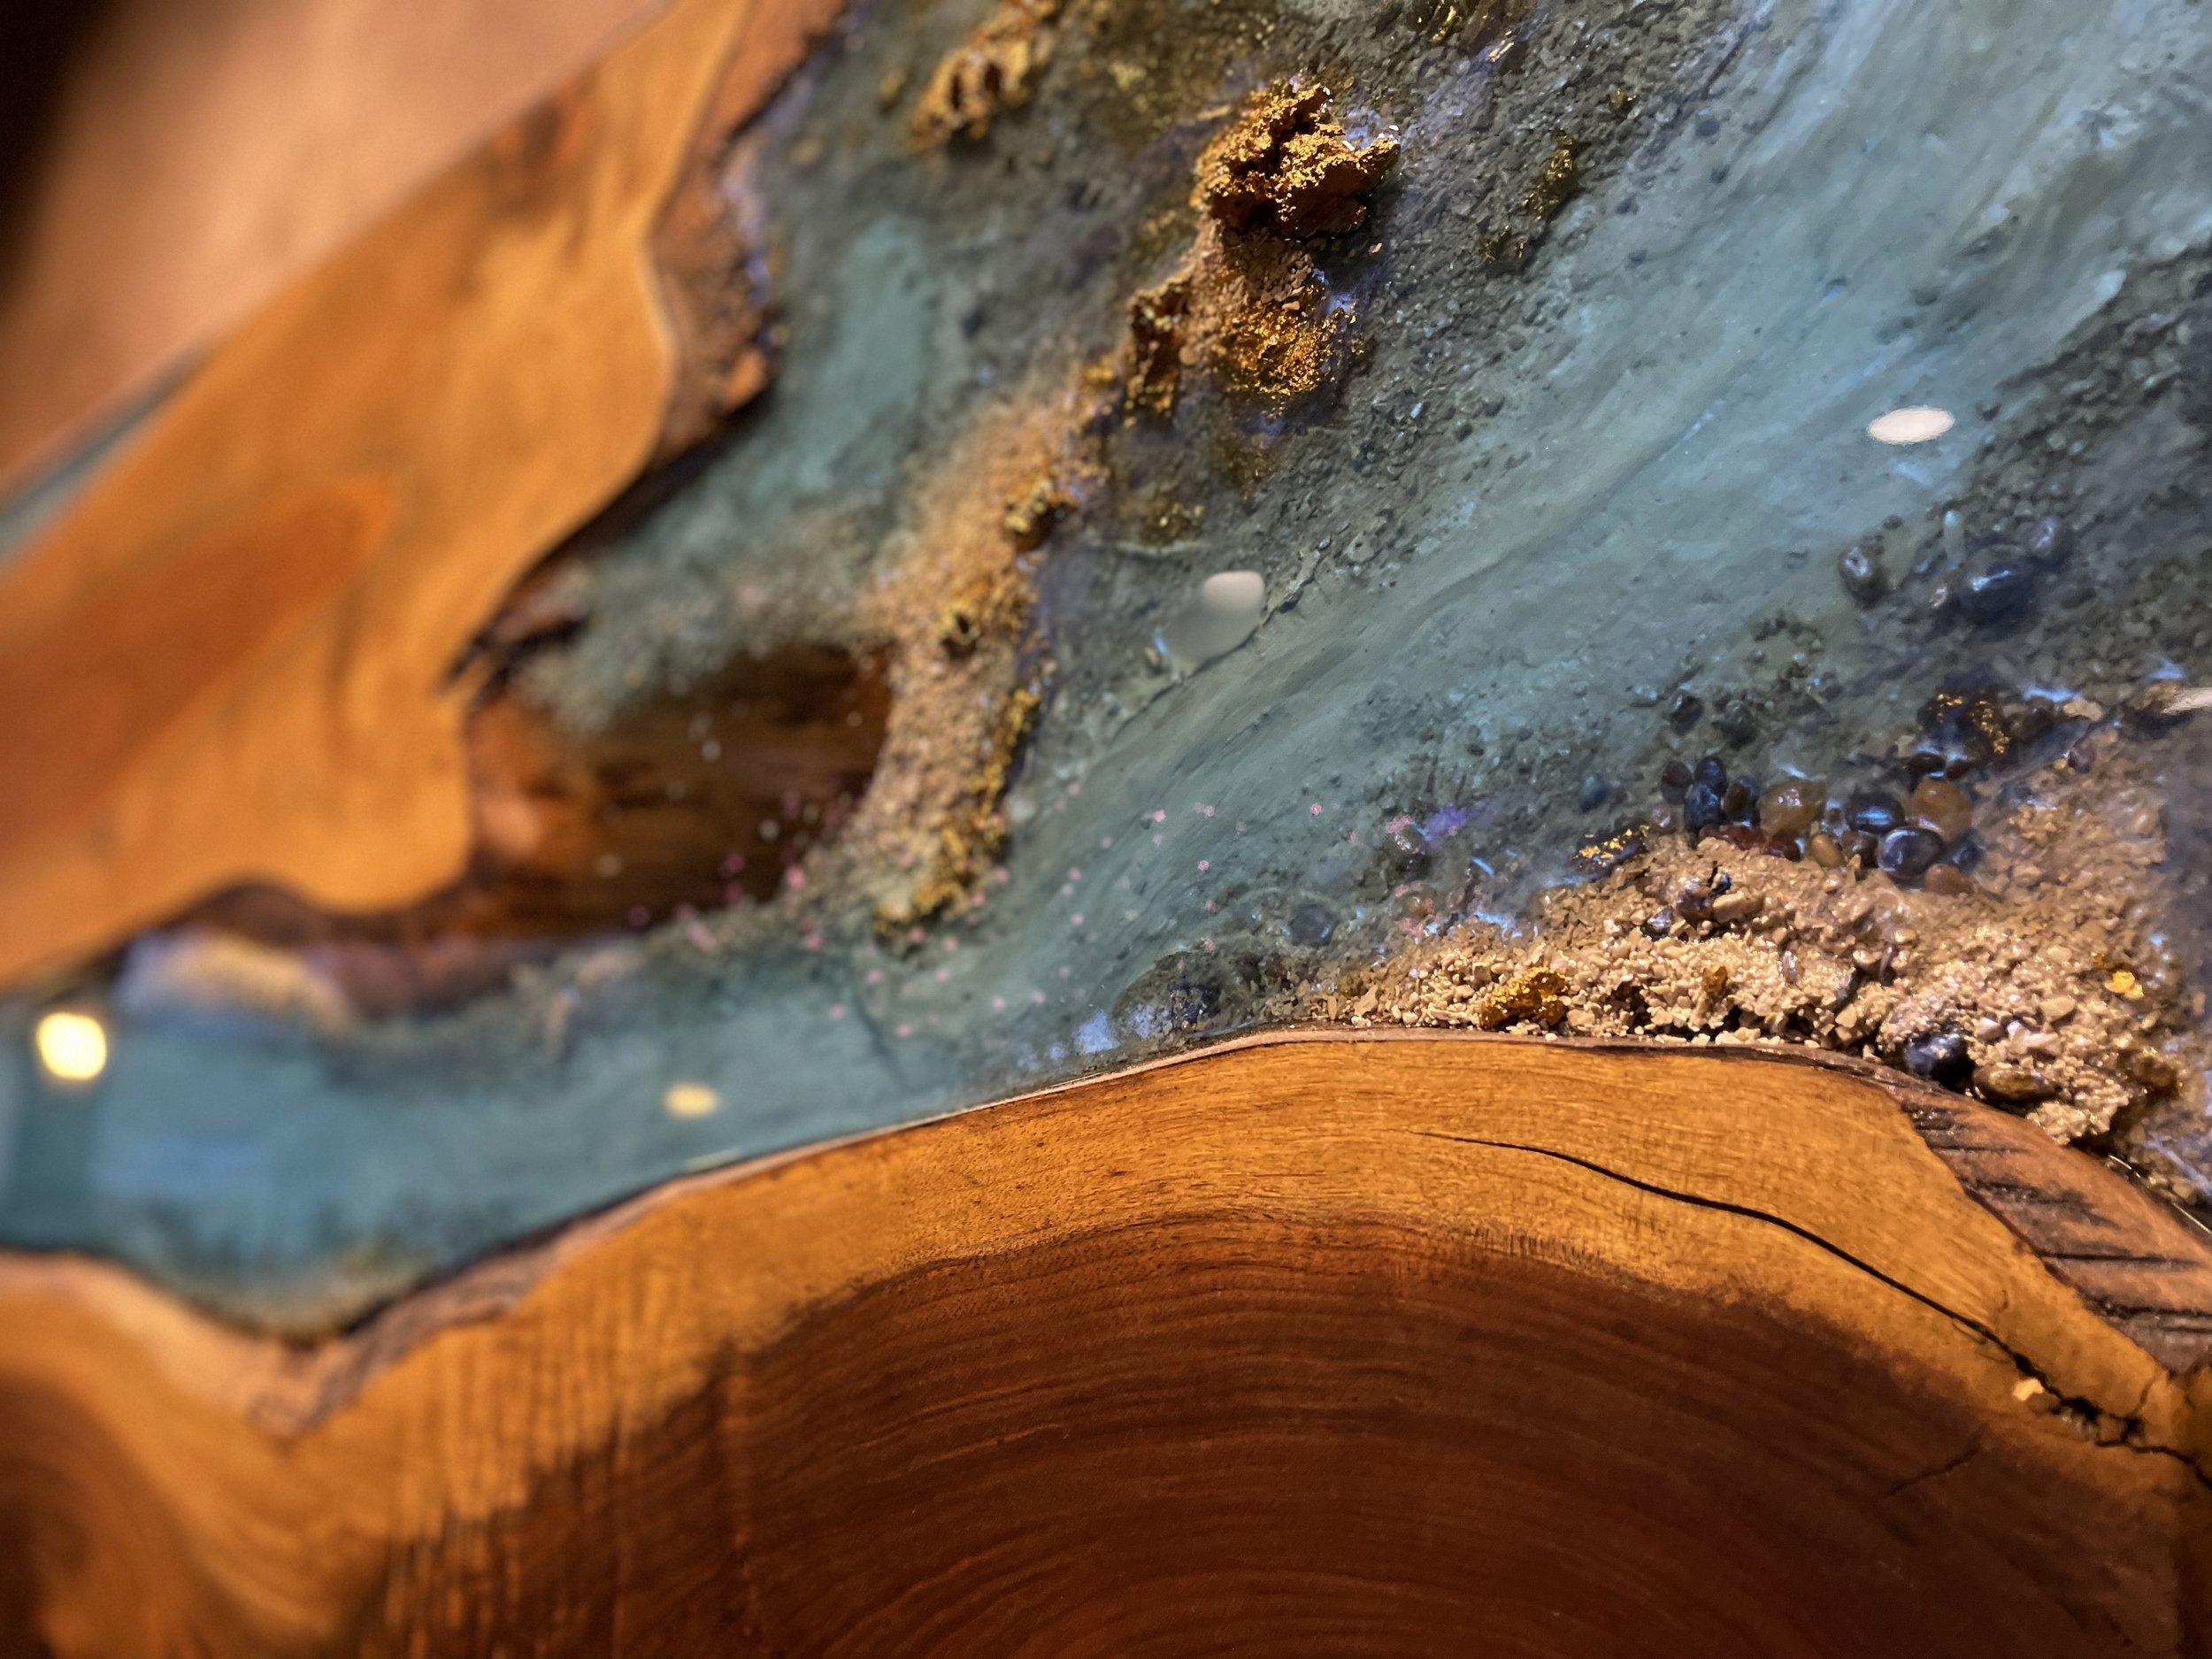 River Club of Mequon Live Edge Resin Wall Art